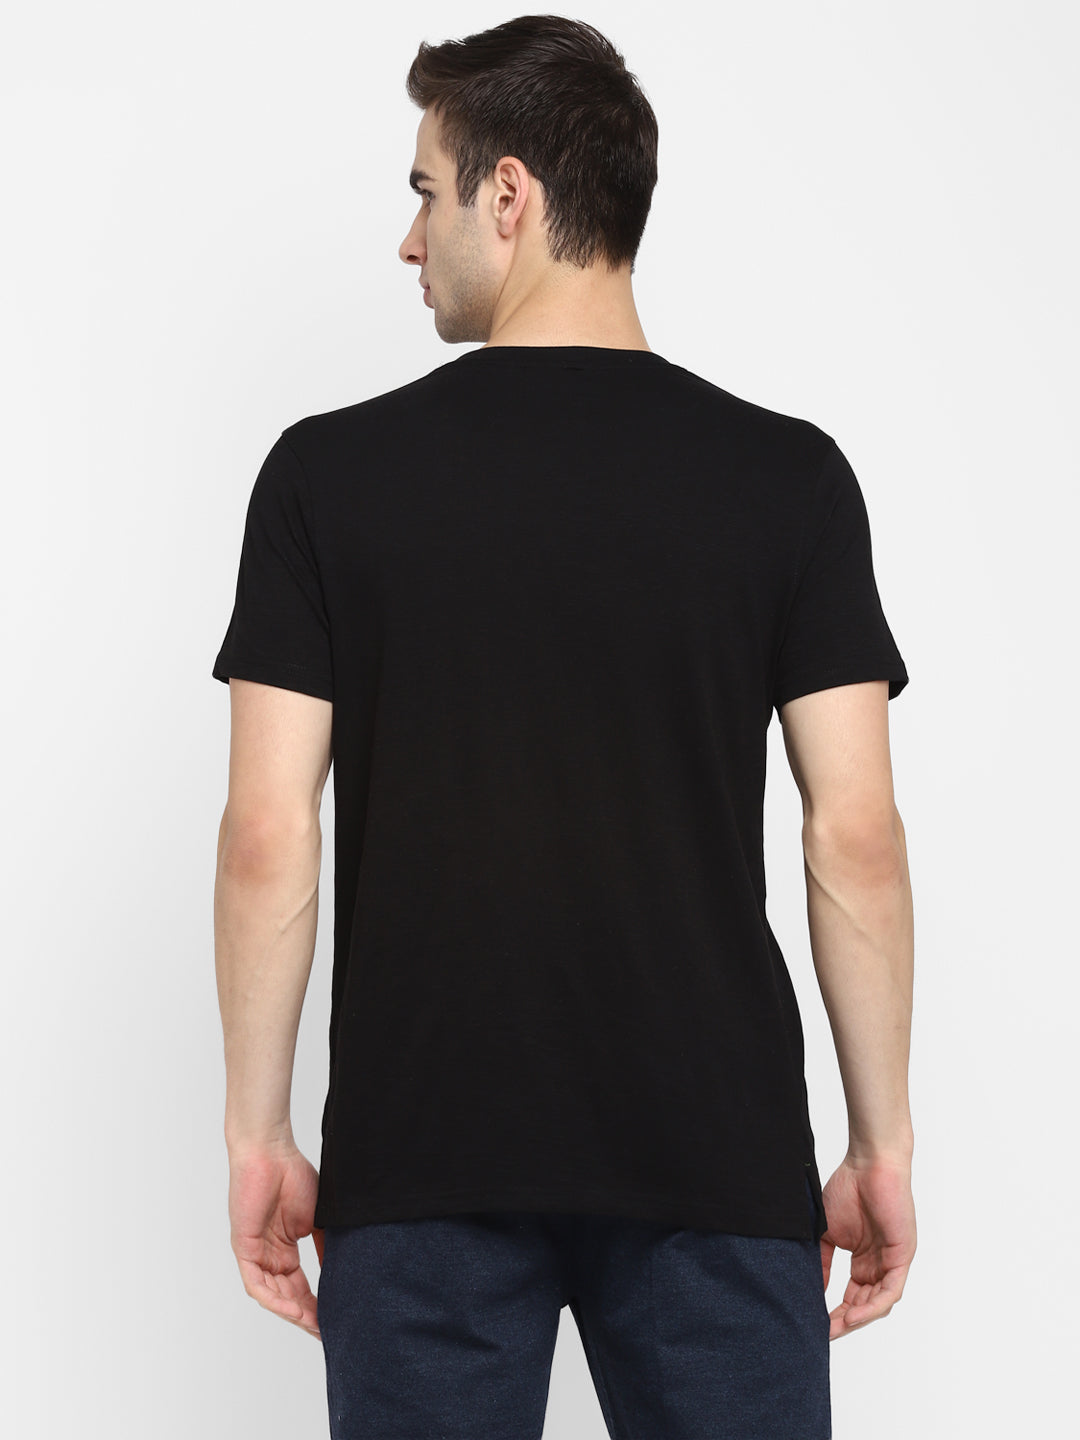 Solid Black and White T-shirts for Men (Pack of 2)